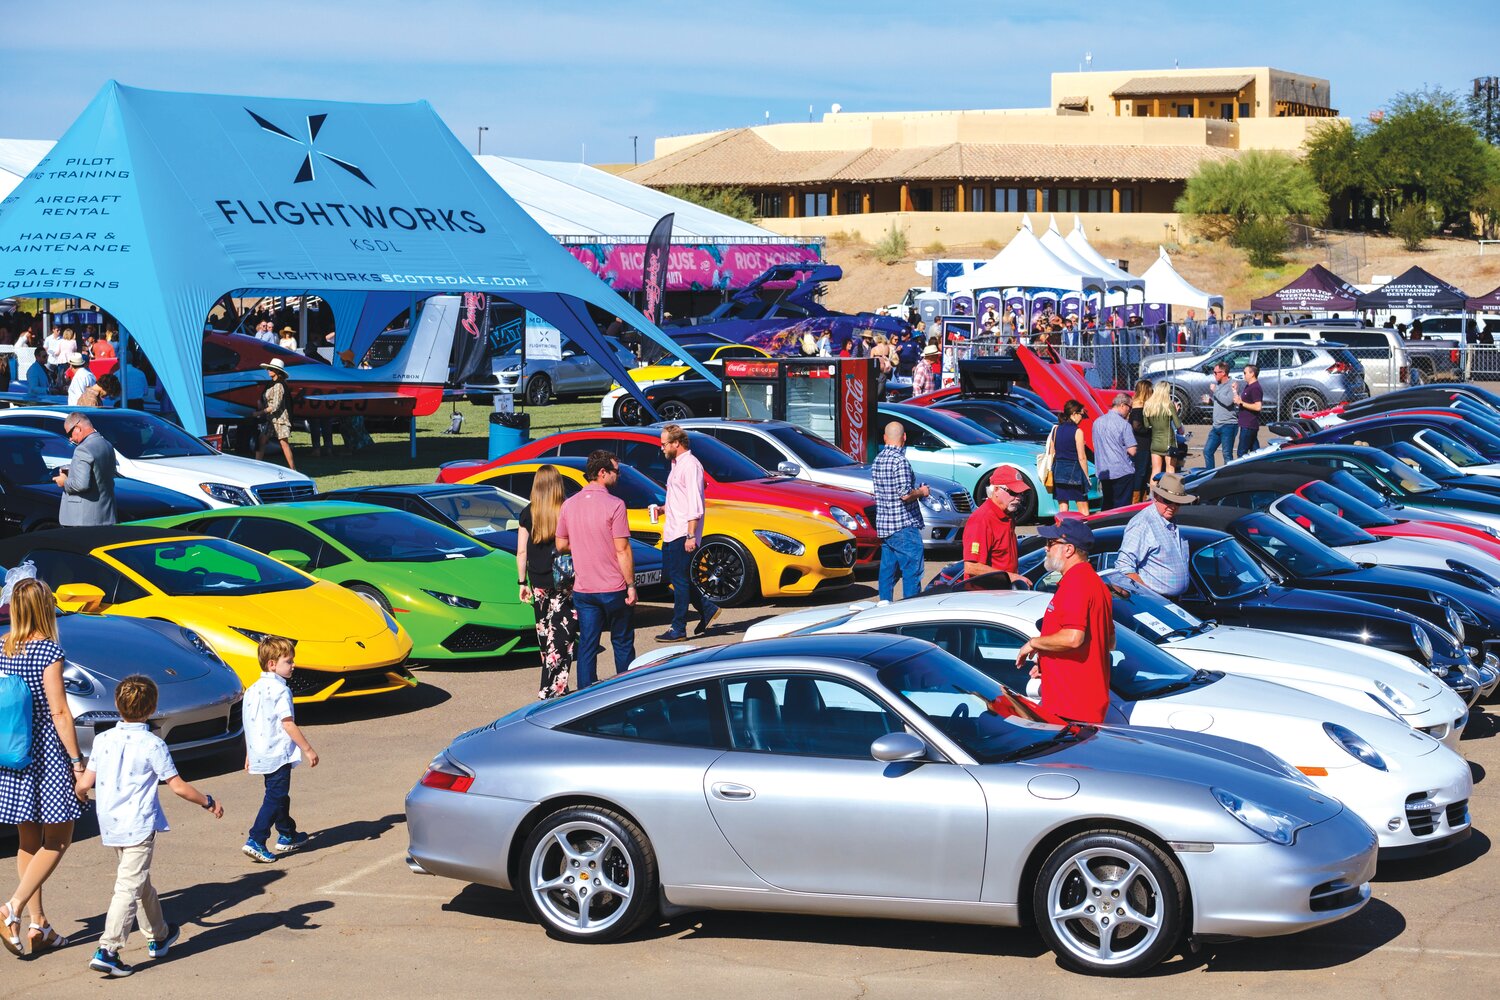 The polo party will have more than 200 exotic cars on display including from Barrett-Jackson, Scottsdale Ferrari, Scottsdale Maserati, Lamborghini North Scottsdale, Arizona Porsche Club and the title sponsor, Bentley Scottsdale. (Submitted photo)